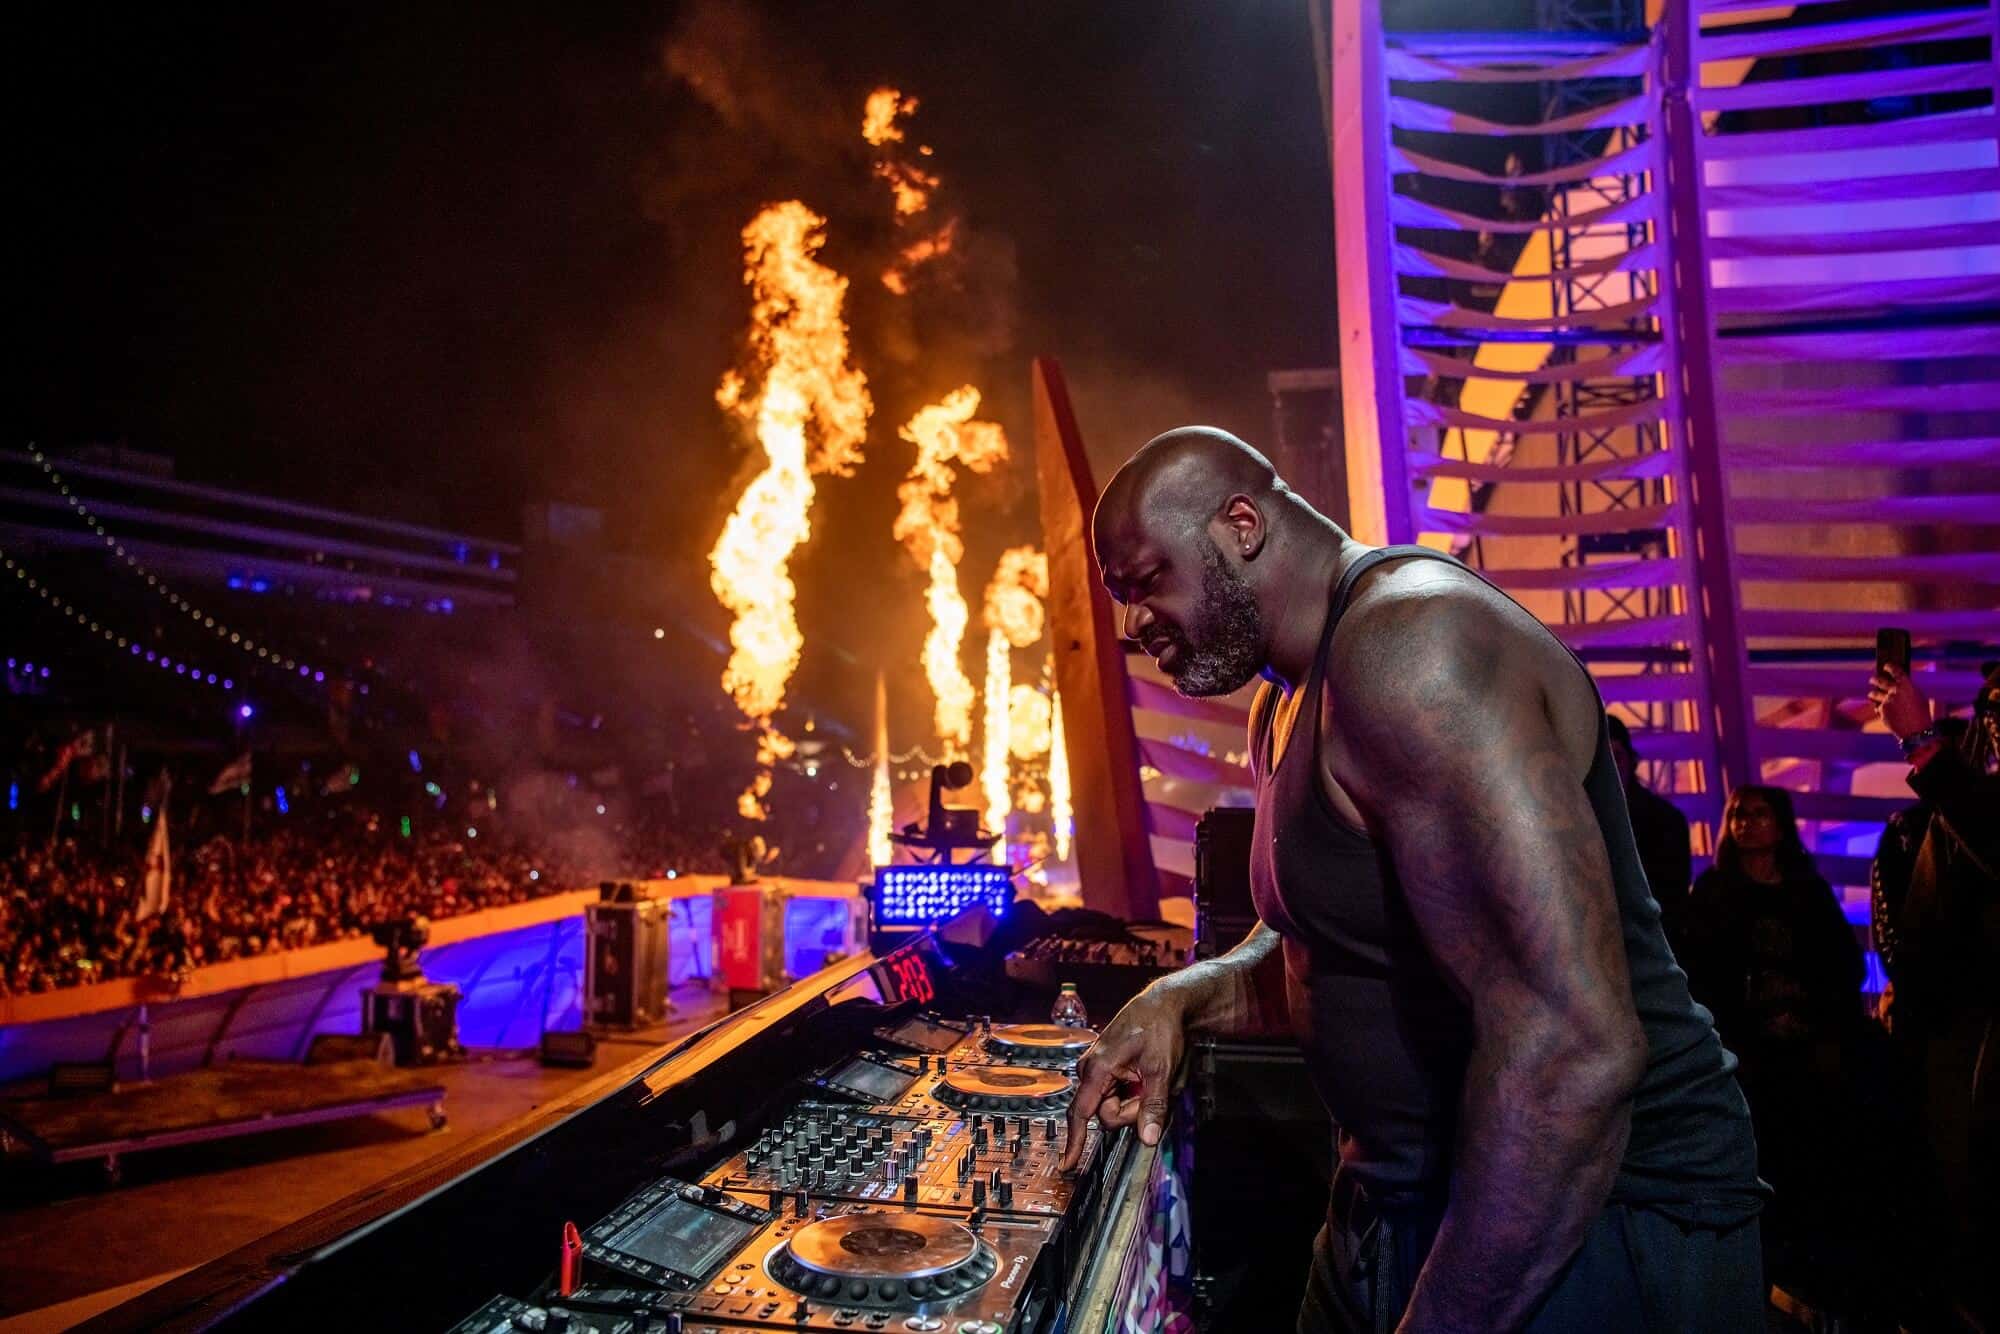 DJ Diesel sets out to break the world record for largest mosh pit at a festival